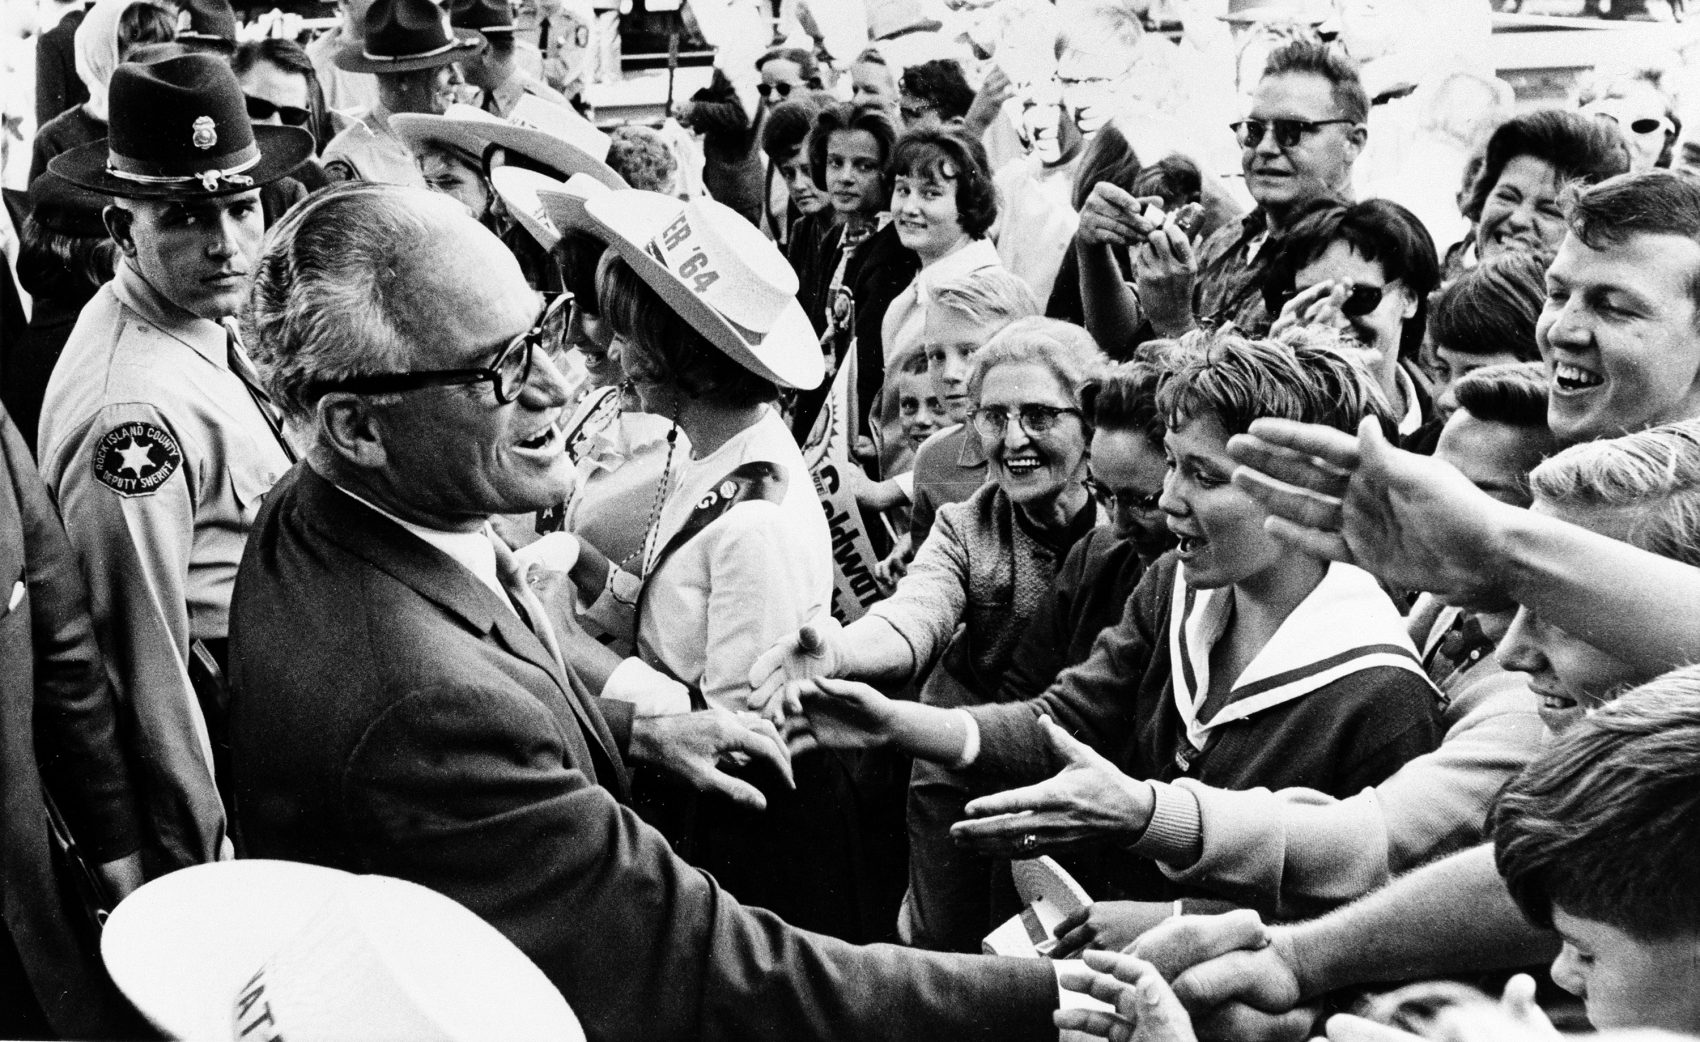 Republican presidential candidate Barry Goldwater greets supporters during a whistle-stop tour of Rock Island, Ill., on Oct. 3, 1964. (Henry Burroughs/AP)